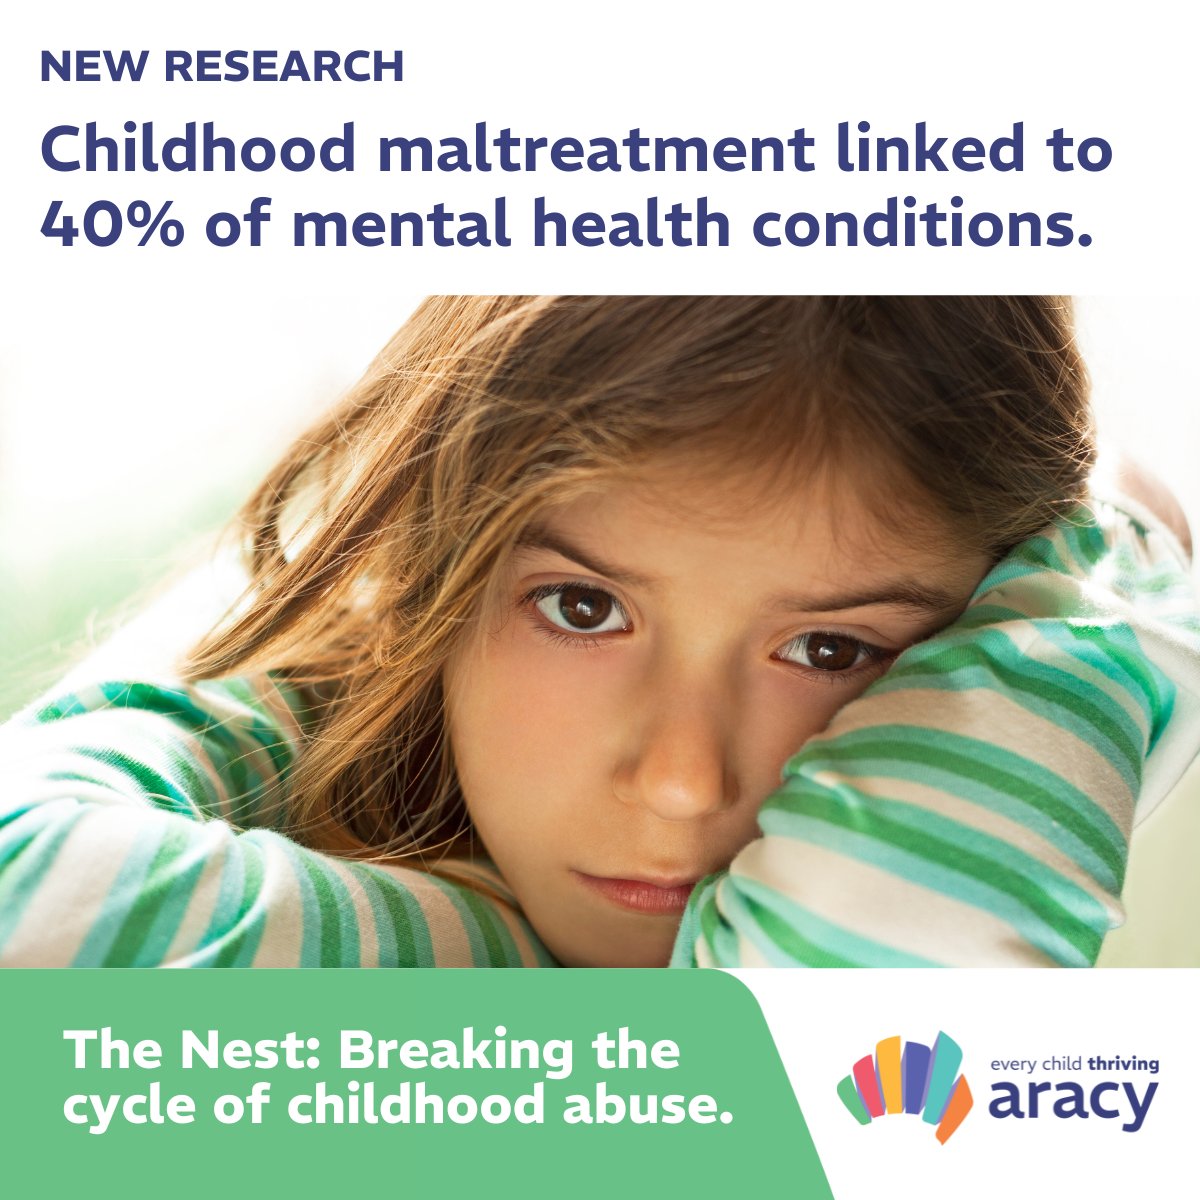 NEW REPORT: Child abuse linked to 40% of mental health issues in Australia. #TheNest by ARACY offers a framework to prevent this. Let's prioritise child well-being! aracy.org.au/the-nest-in-ac… Read the full report:jamanetwork.com/journals/jamap… #valuedlovedandsafe #EveryChildThriving